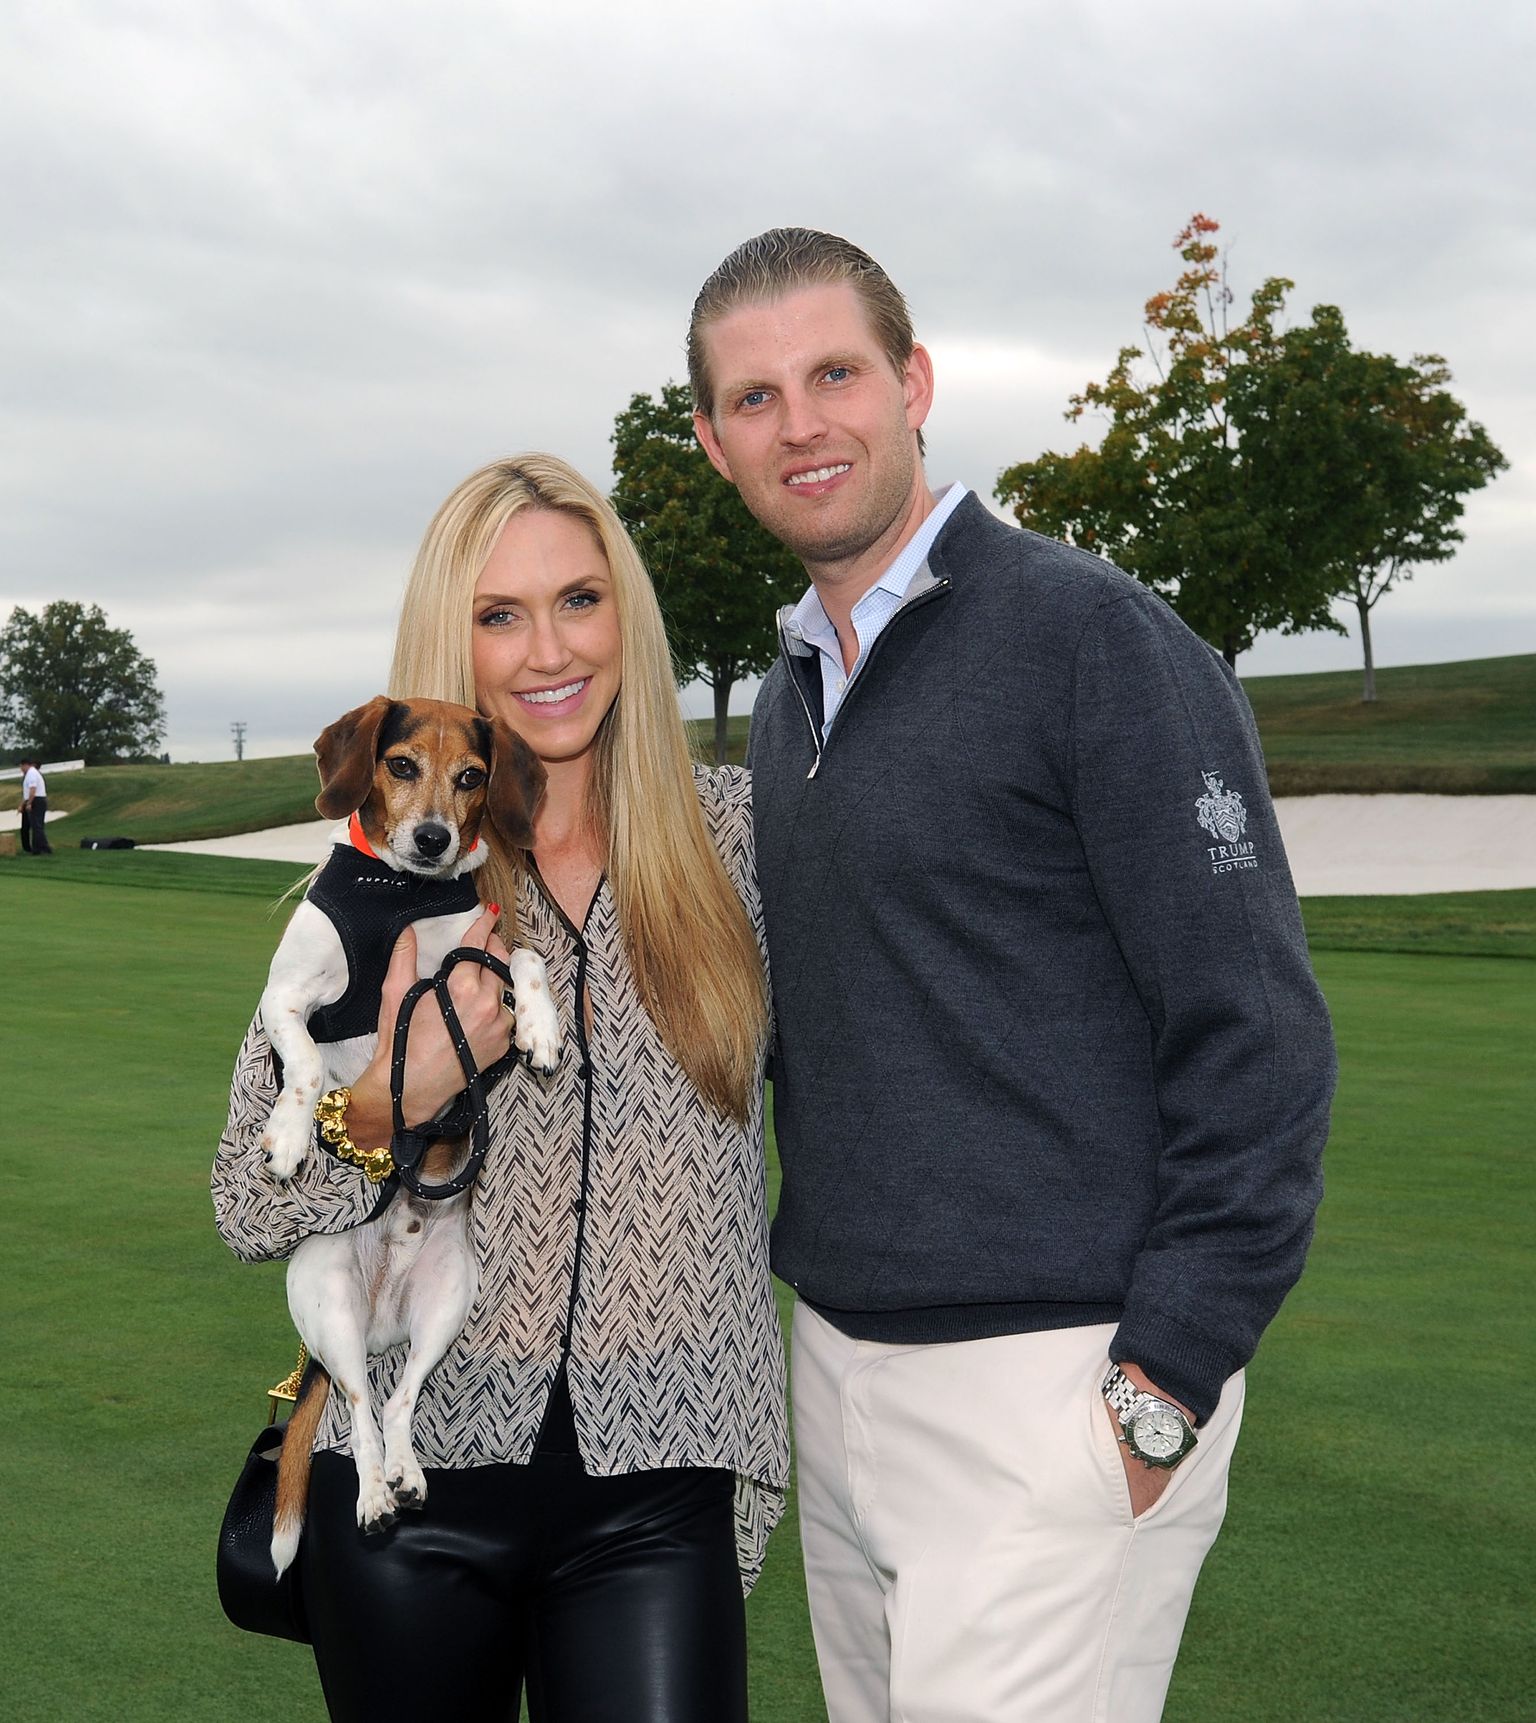 Eric Trump and Lara Trump attend the Concours d'Elegance at Trump National Golf Club on September 27, 2015 | Photo: Getty Images